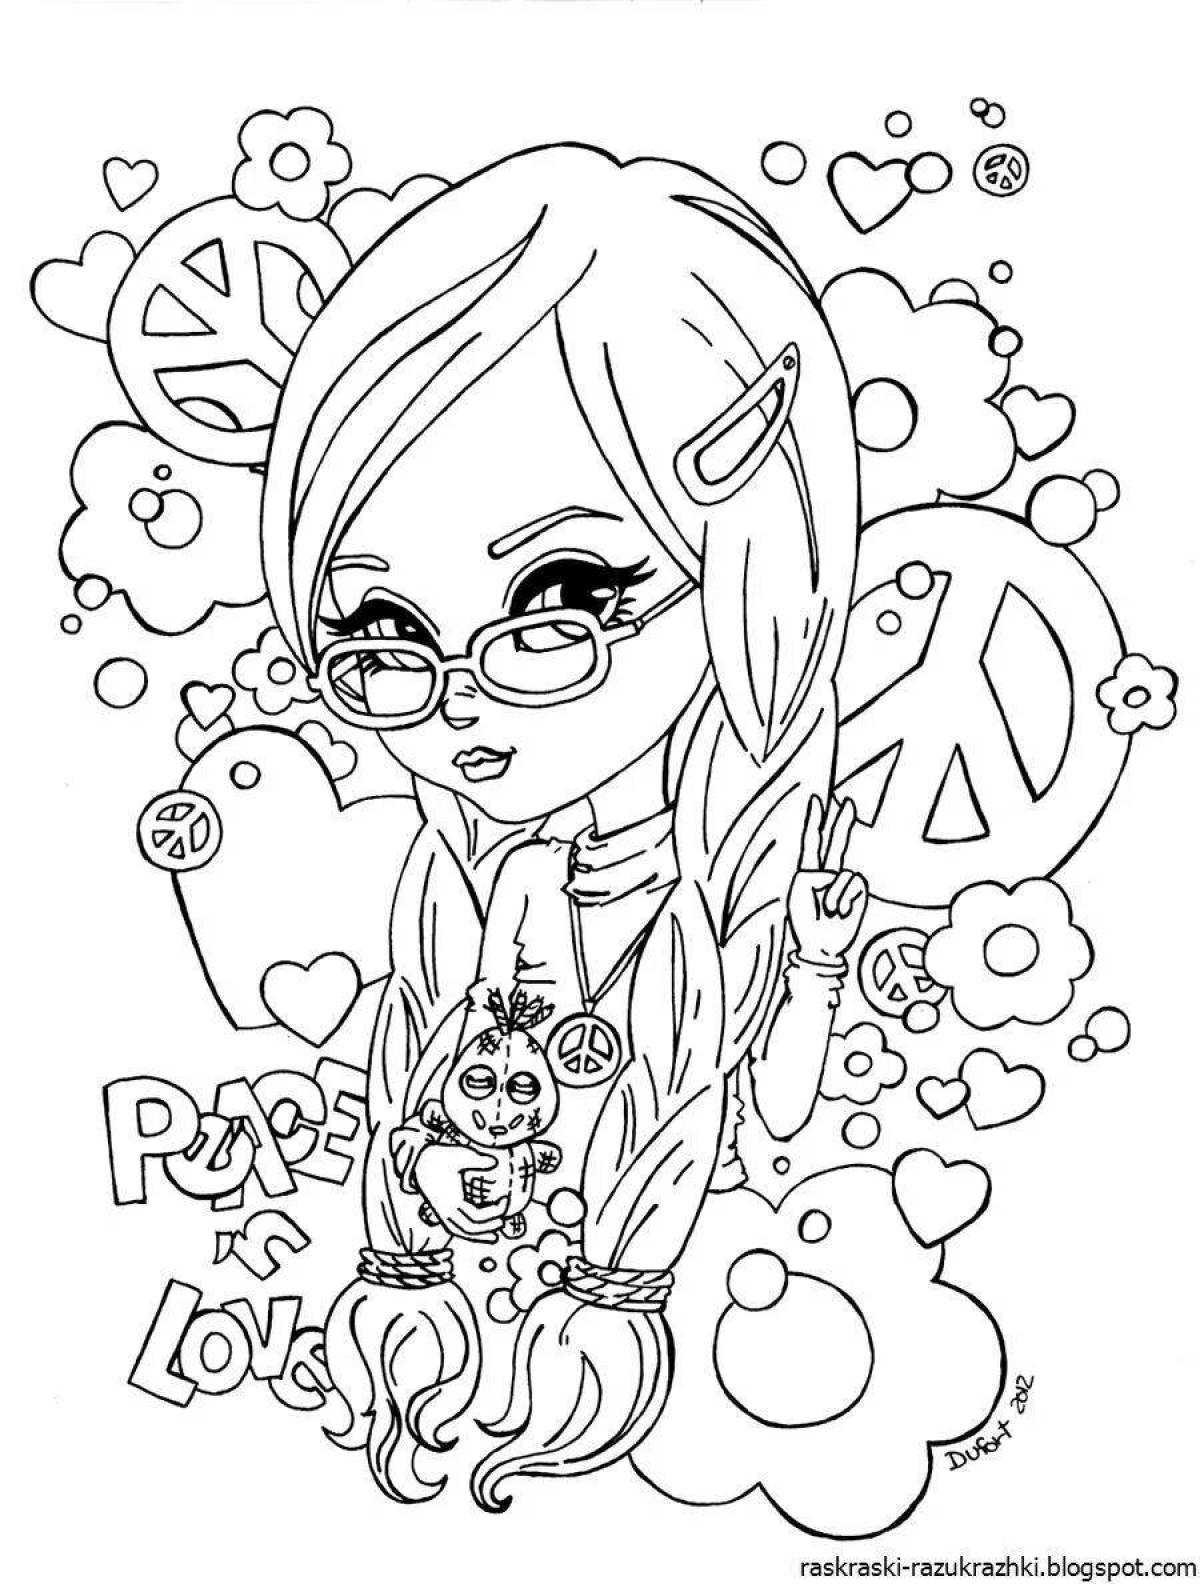 Glowing coloring page 13 for girls